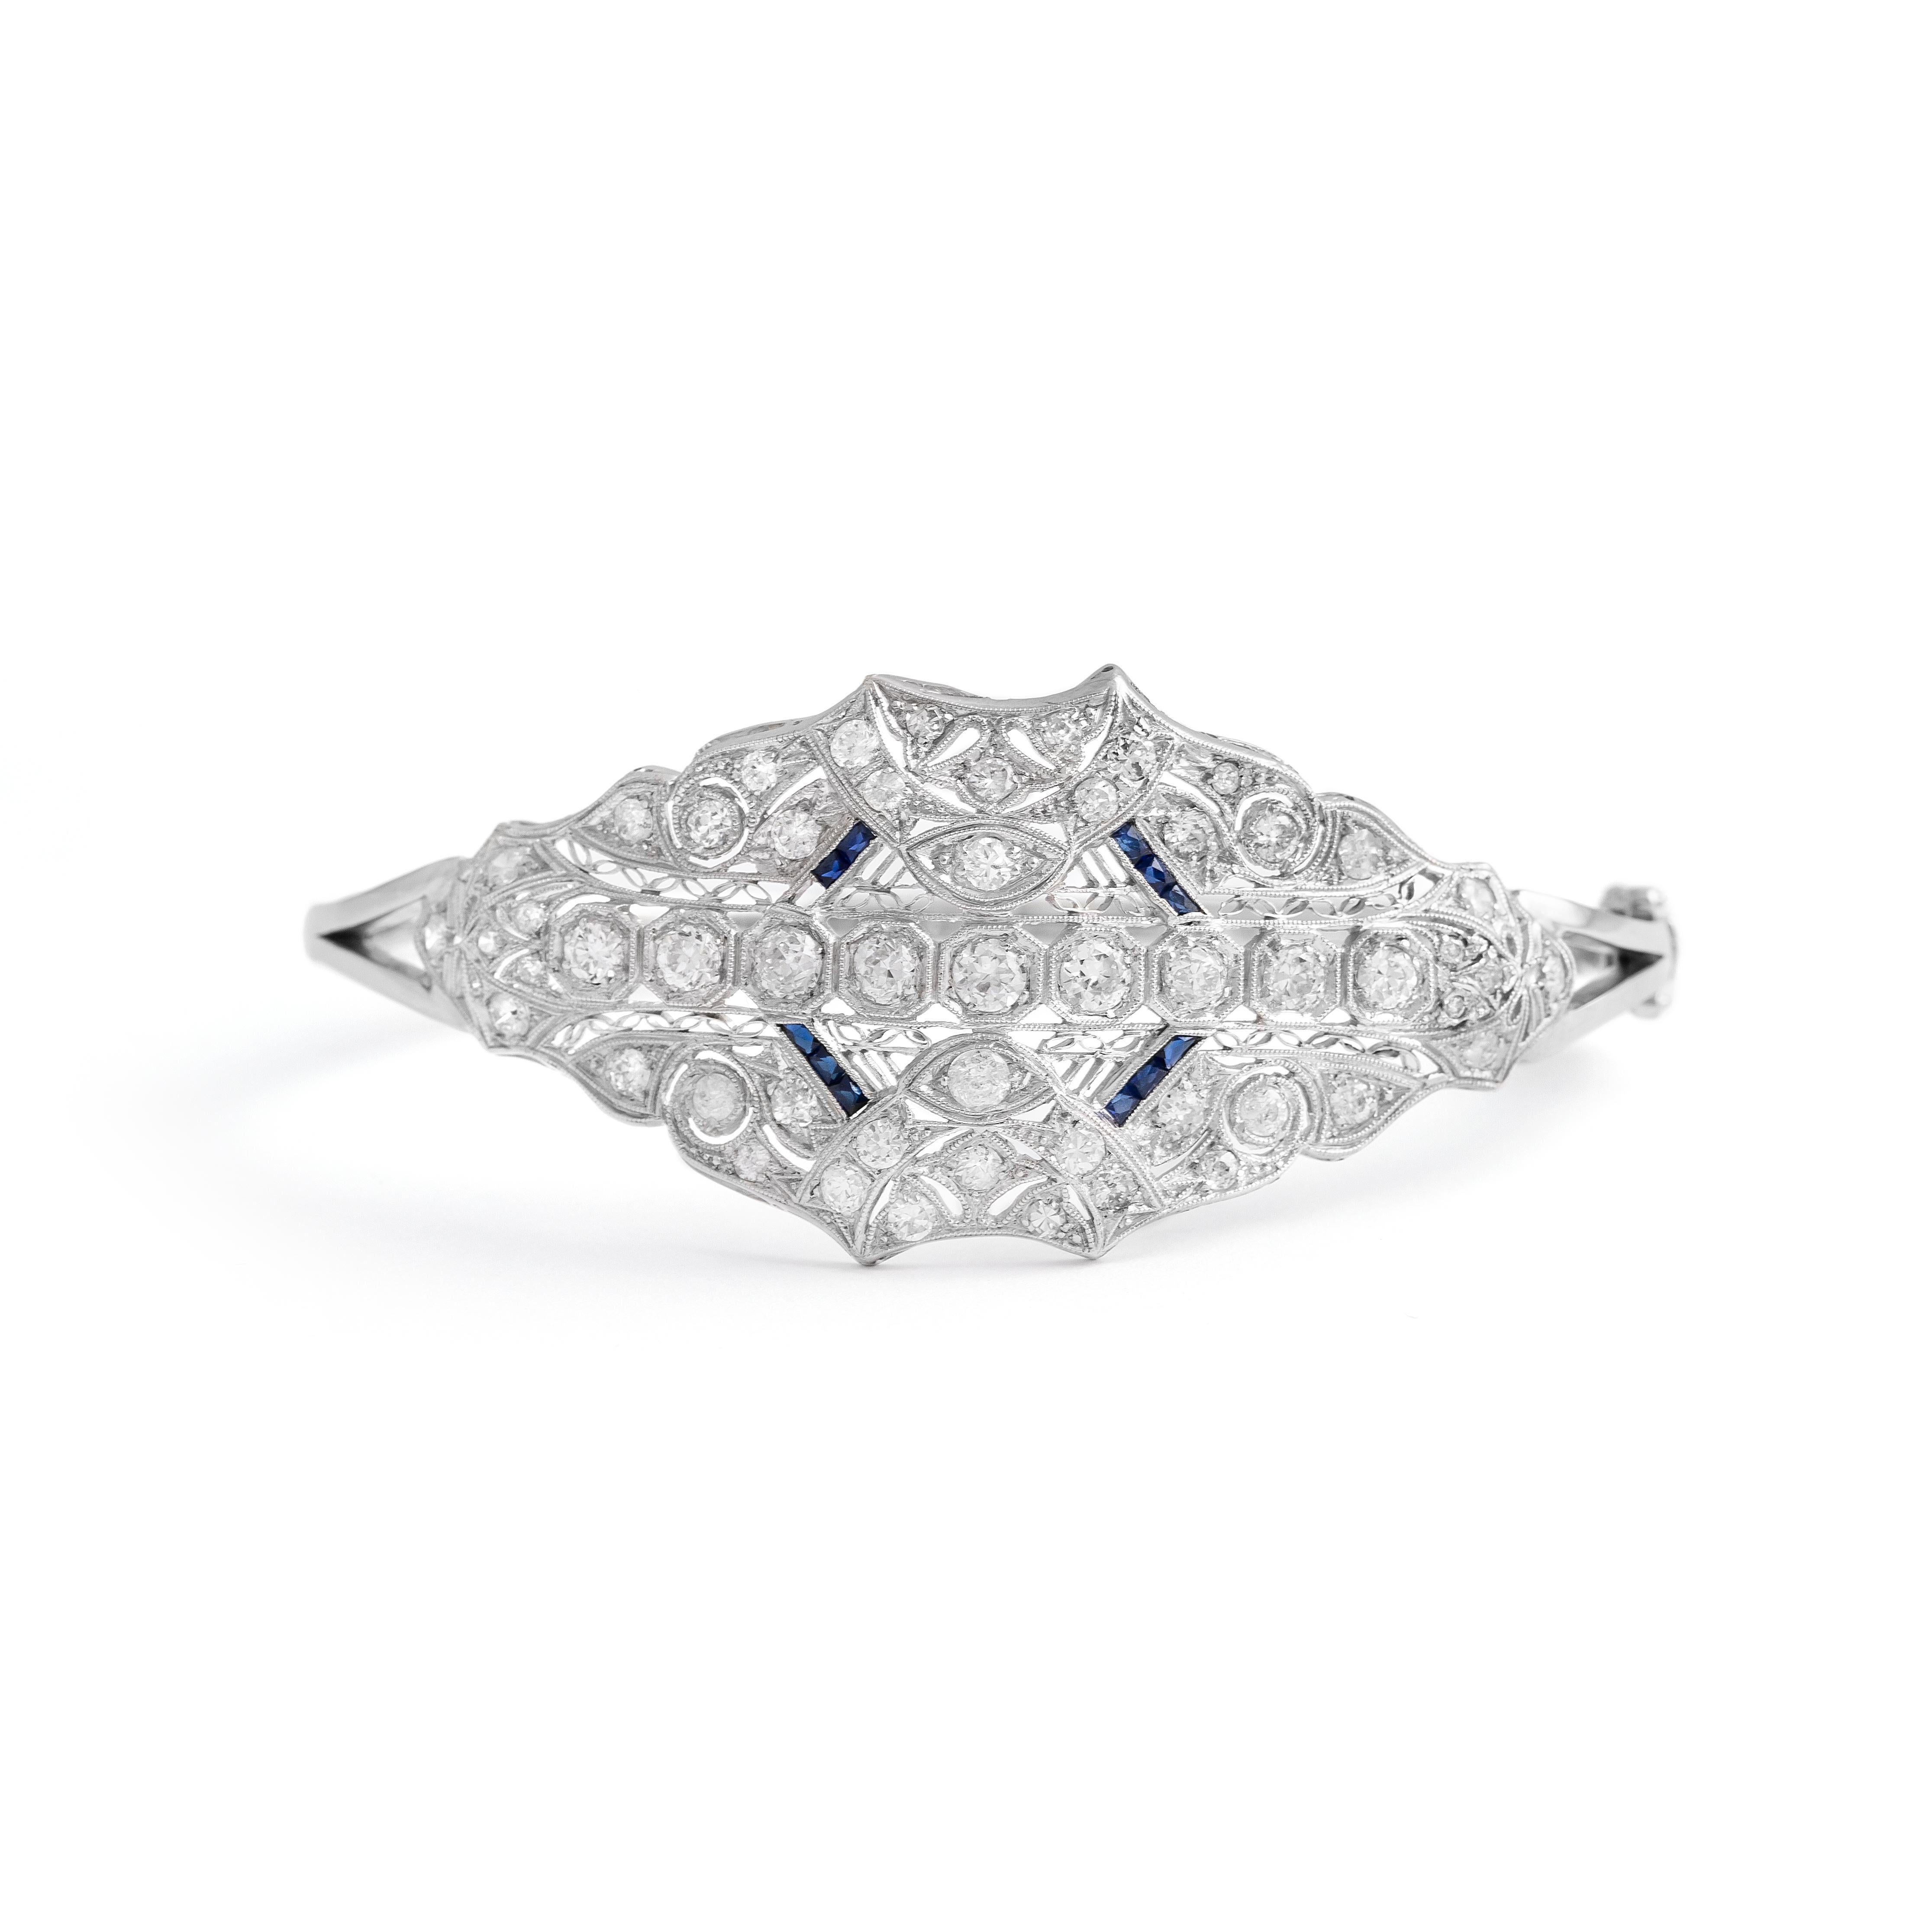 Old mine cut Diamond and calibrated Sapphire on Platinum and 14K White Gold Bangle.
Top part dimensions: 5.50 centimeters x 3.00 centimeters.
Wrist size: 18.00 centimeters.